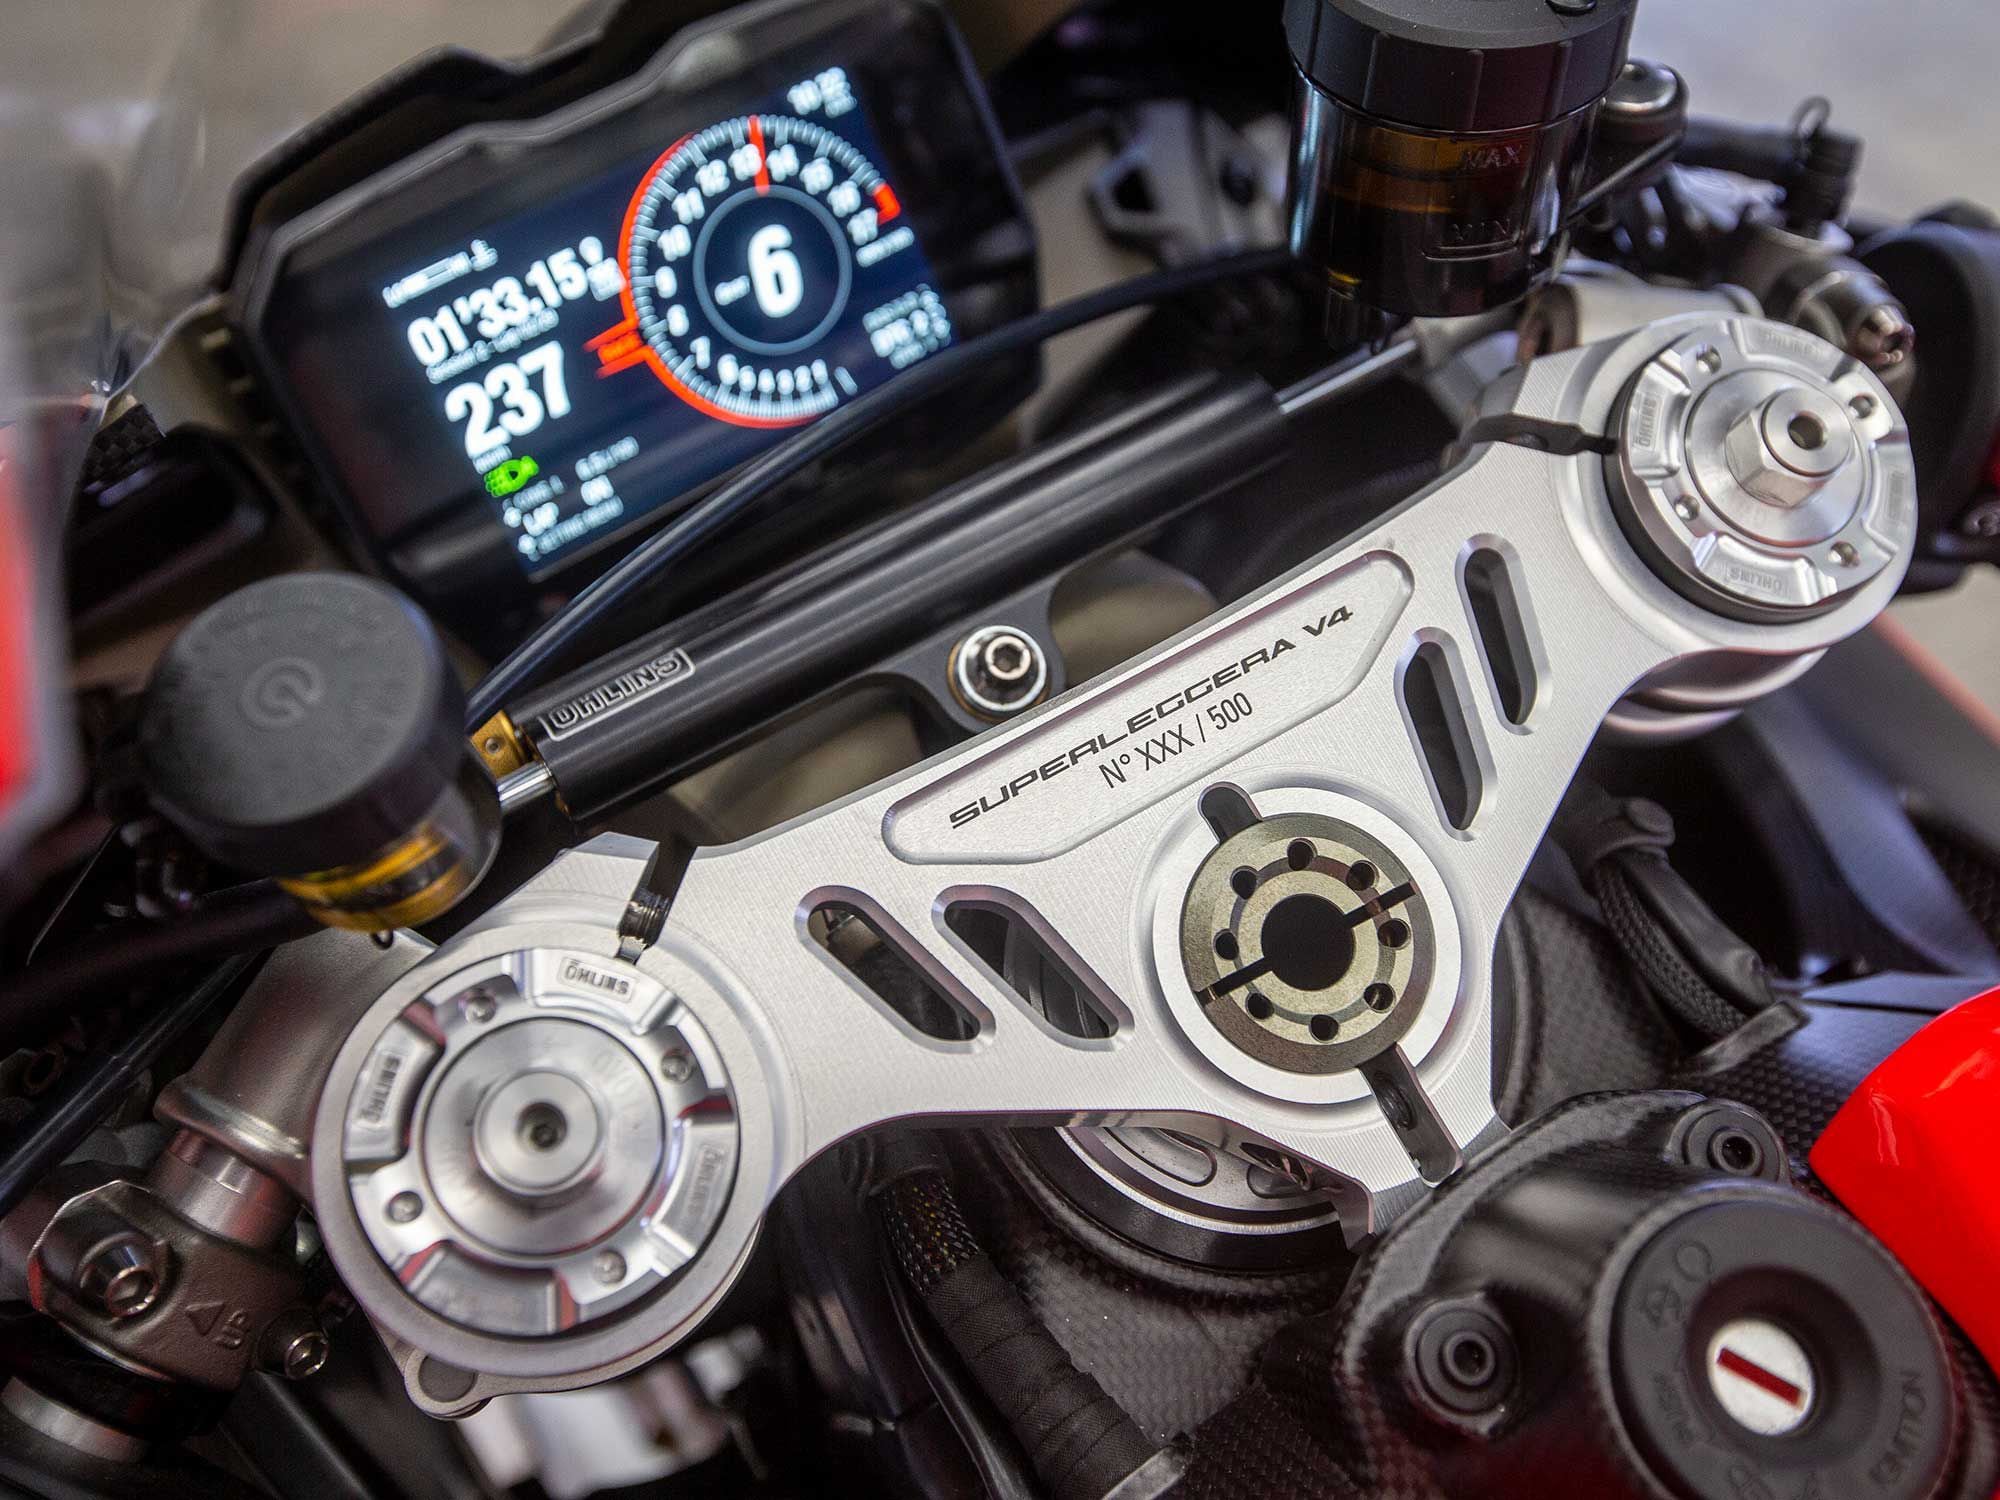 Every Superleggera produced receives an incredible attention to detail, including a laser-etched bike number on the triple clamp and ignition key.